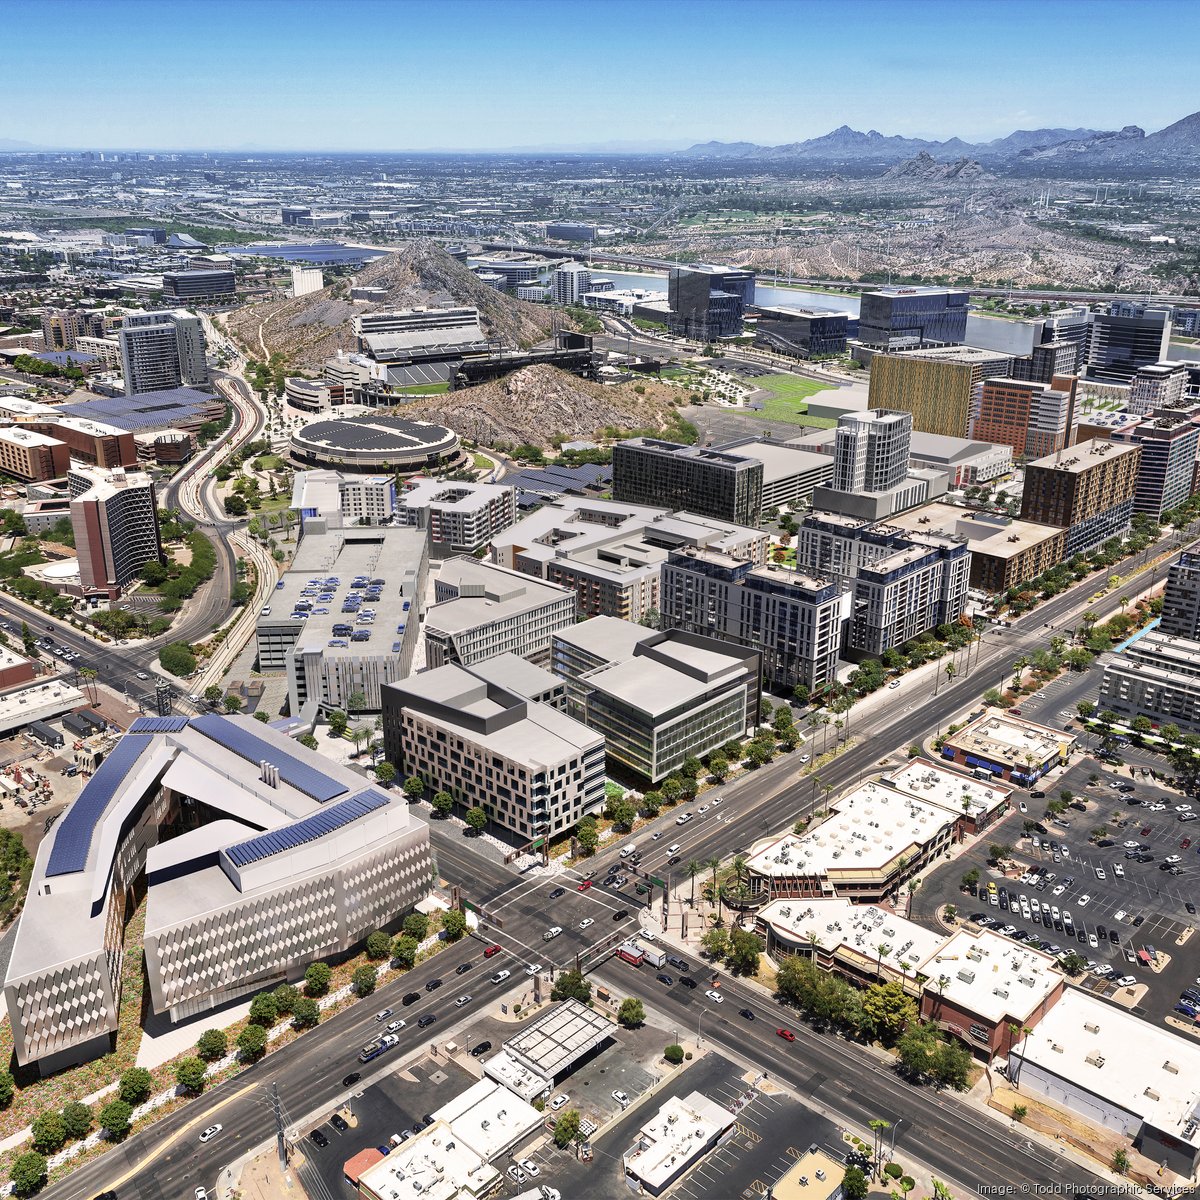 Novus Innovation Corridor brings unique, innovative and sustainable vision  to campus - The Arizona State Press